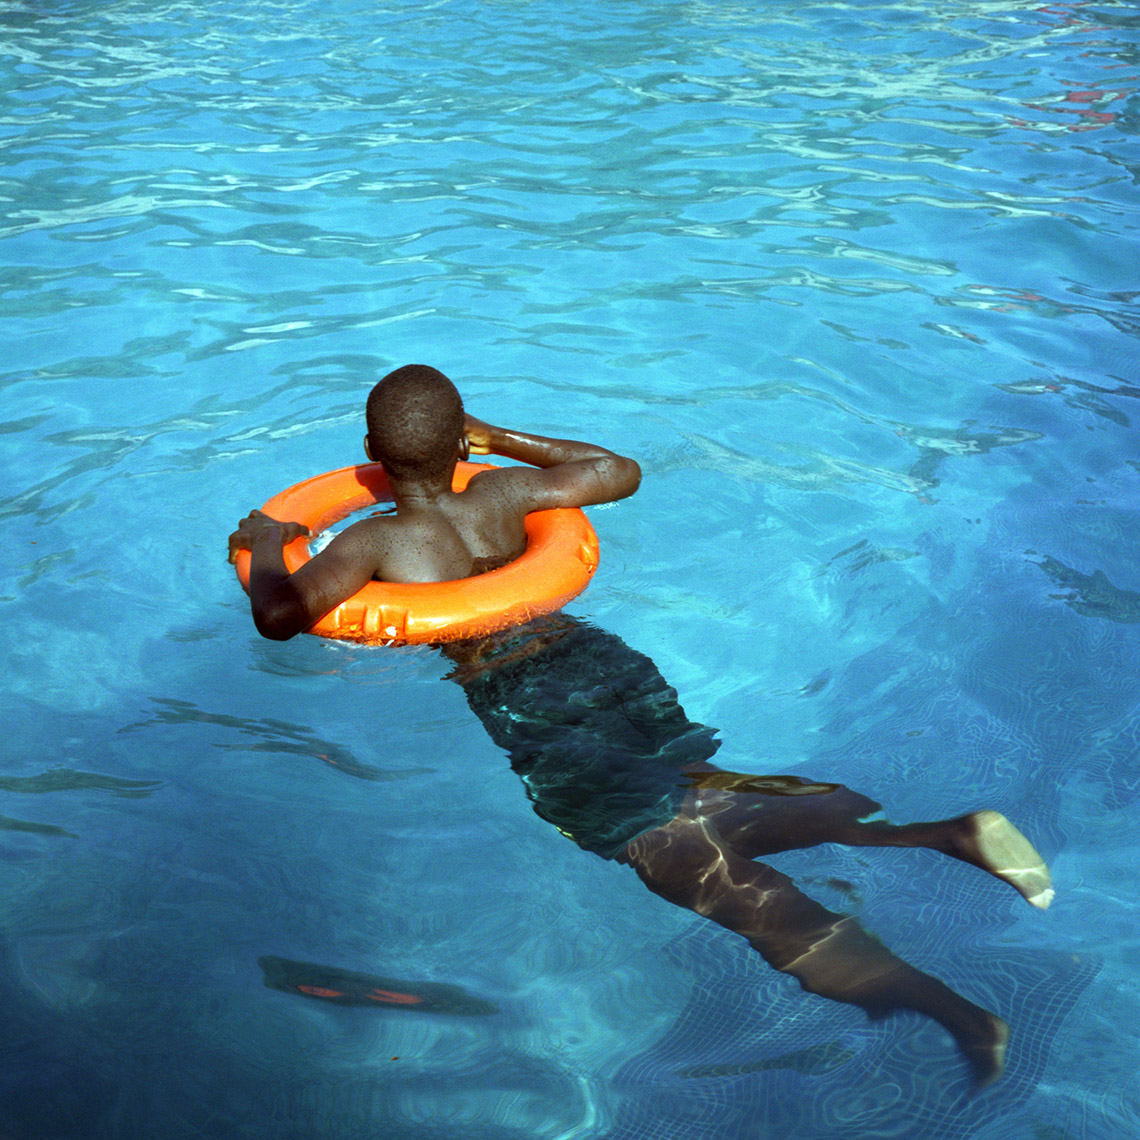 Boy in the pool, The Gambia